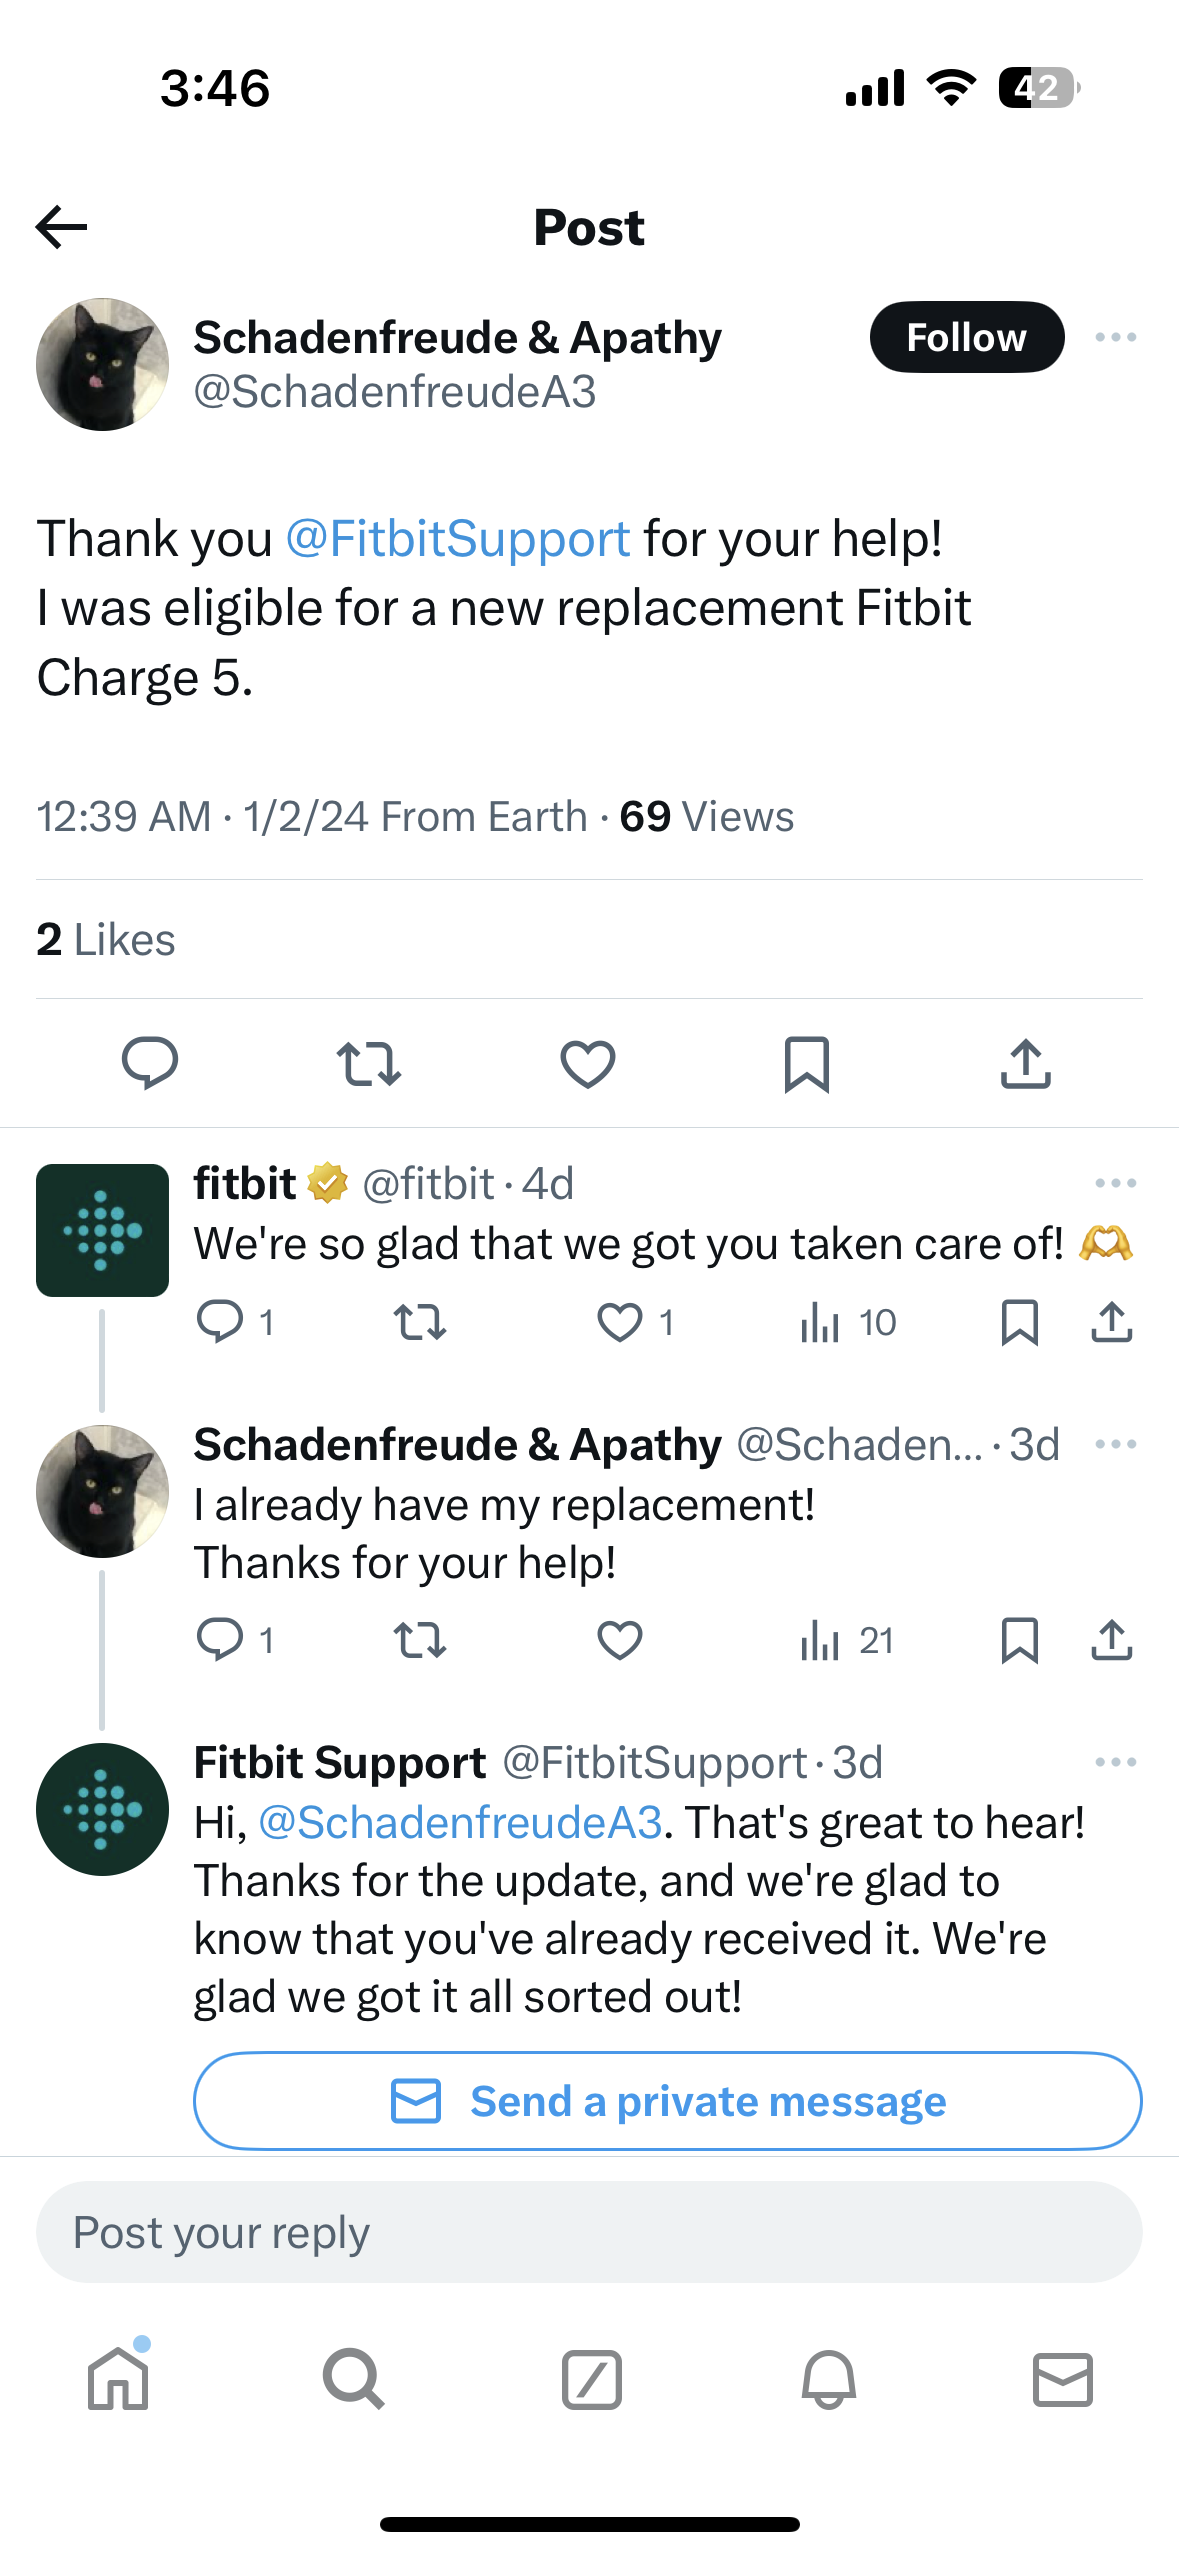 A customer on social thanks Fitbit support for helping them. The brand account responds thanking the customer several times.